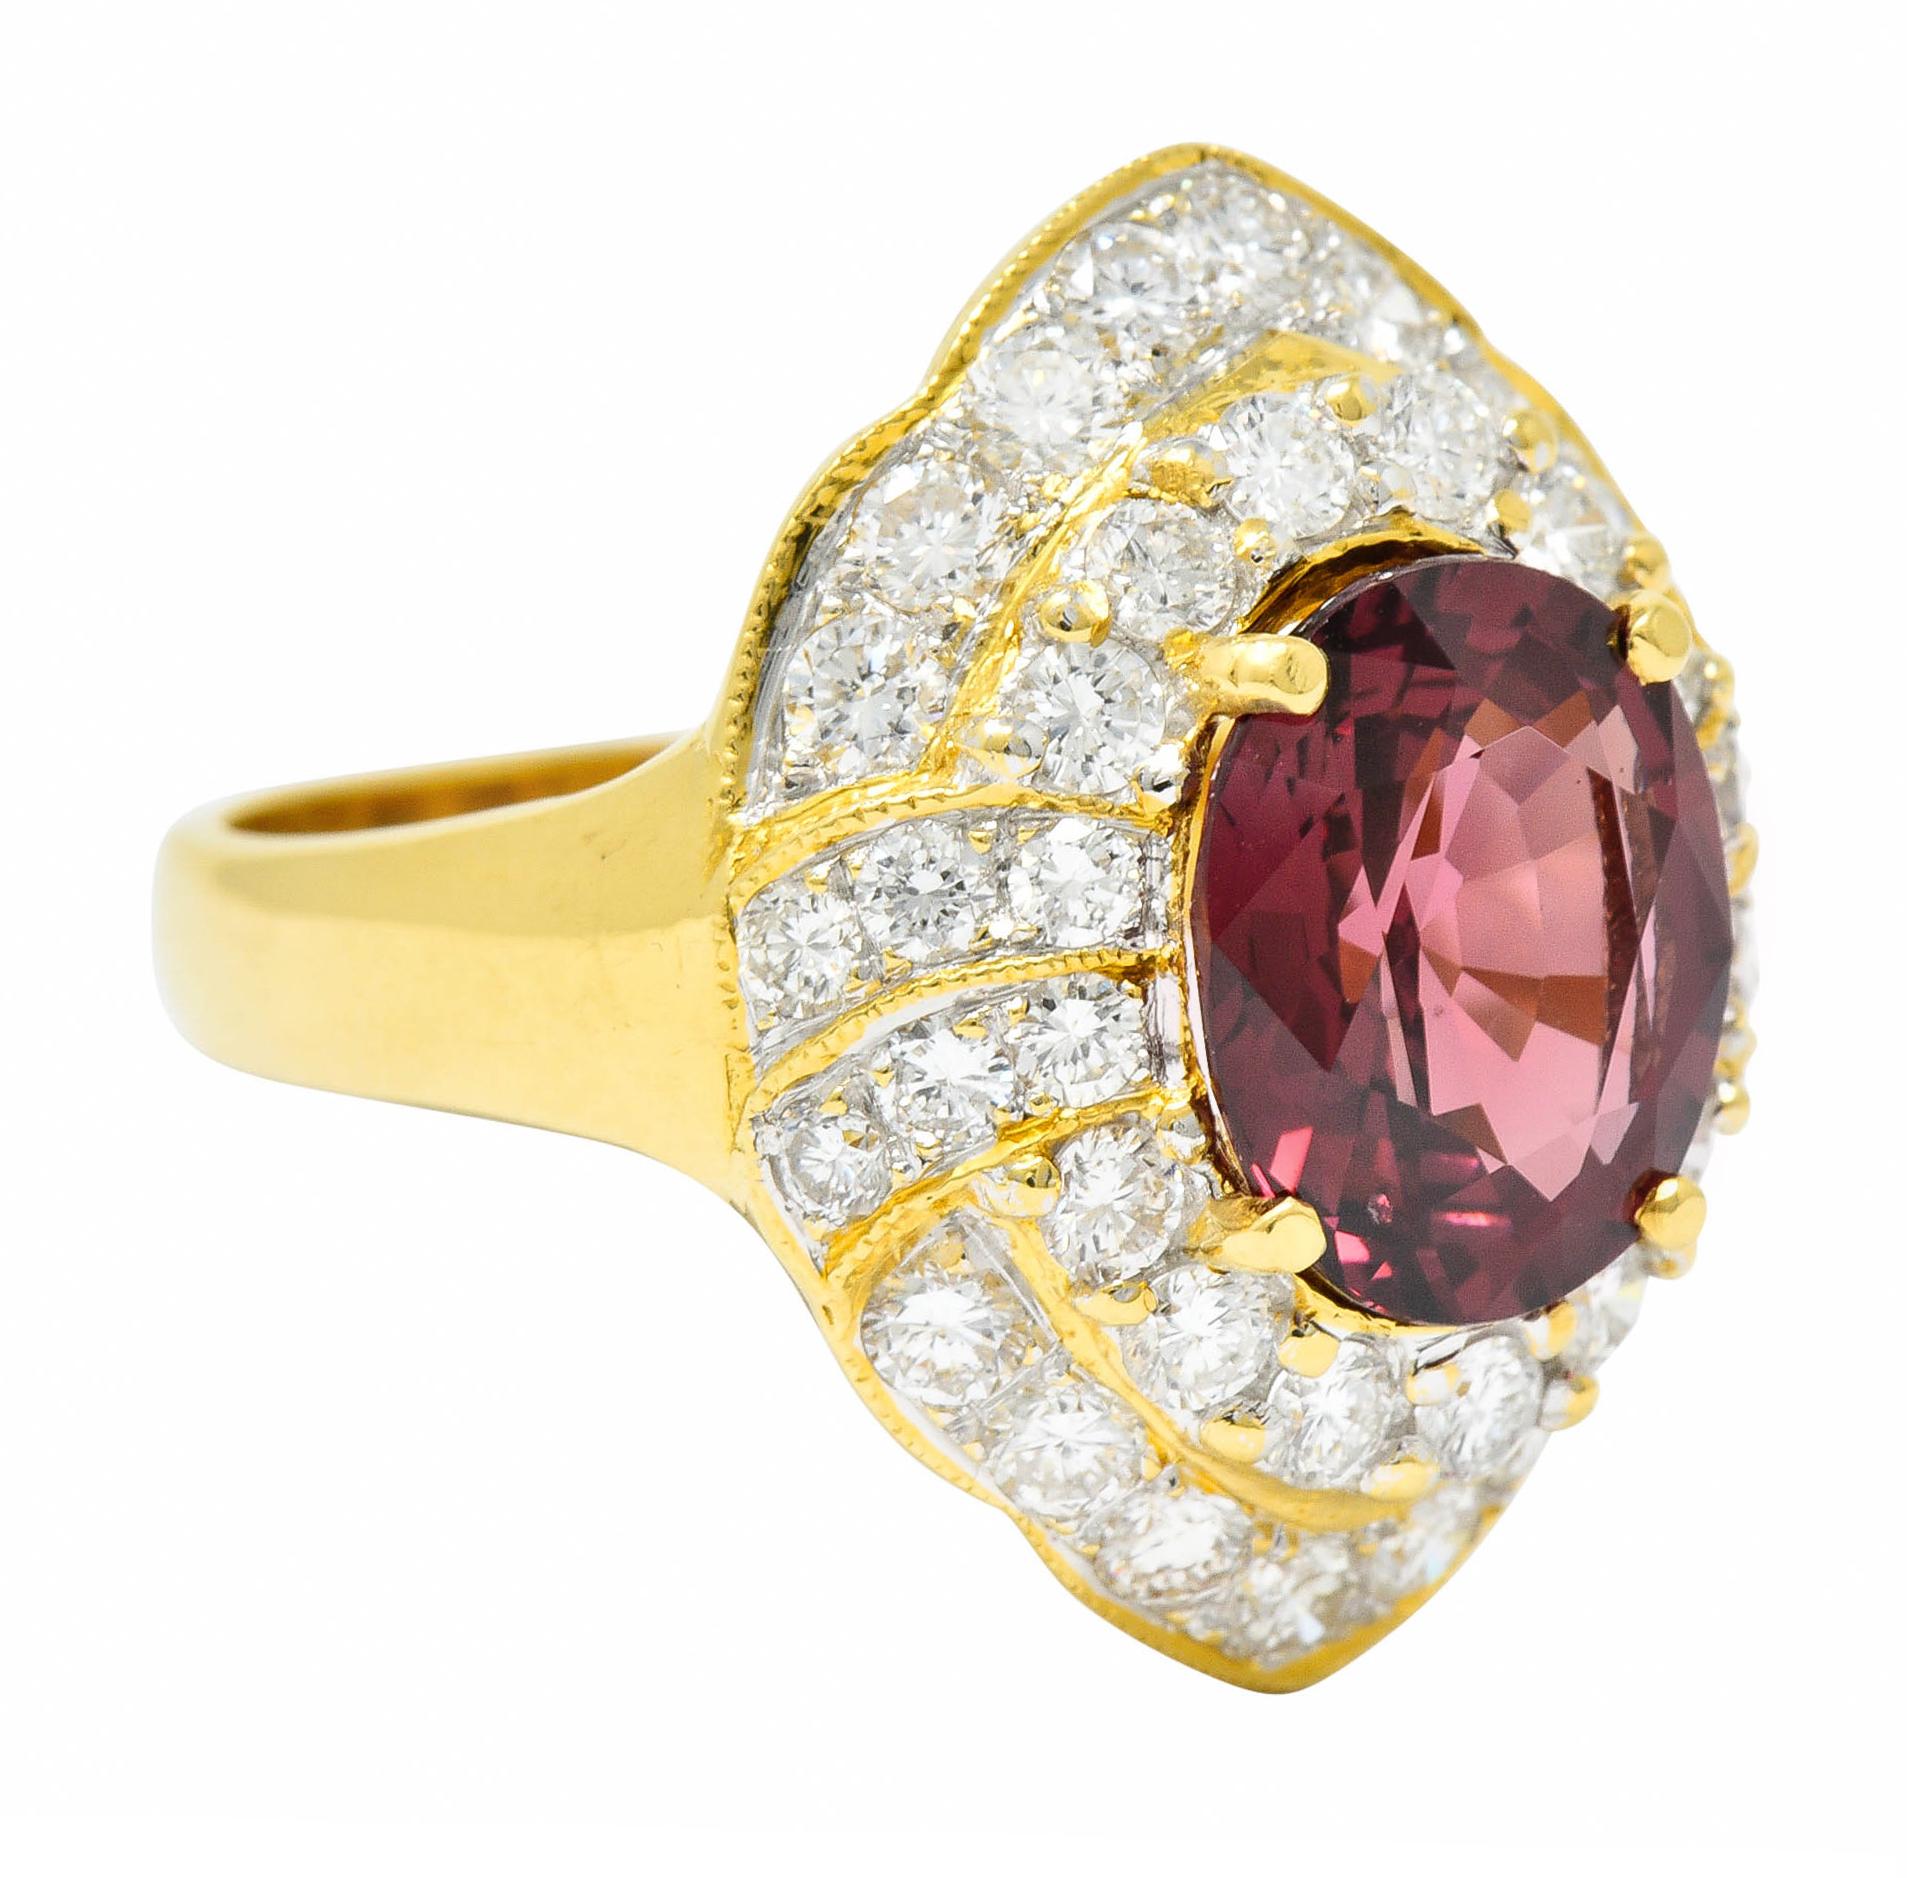 Designed as a subtle navette form with two tiers of diamonds and gold milgrain

Centering an oval cut natural spinel weighing approximately 3.06 carats

Transparent and brownish-red in color with no indications of heat

Surrounding round brilliant